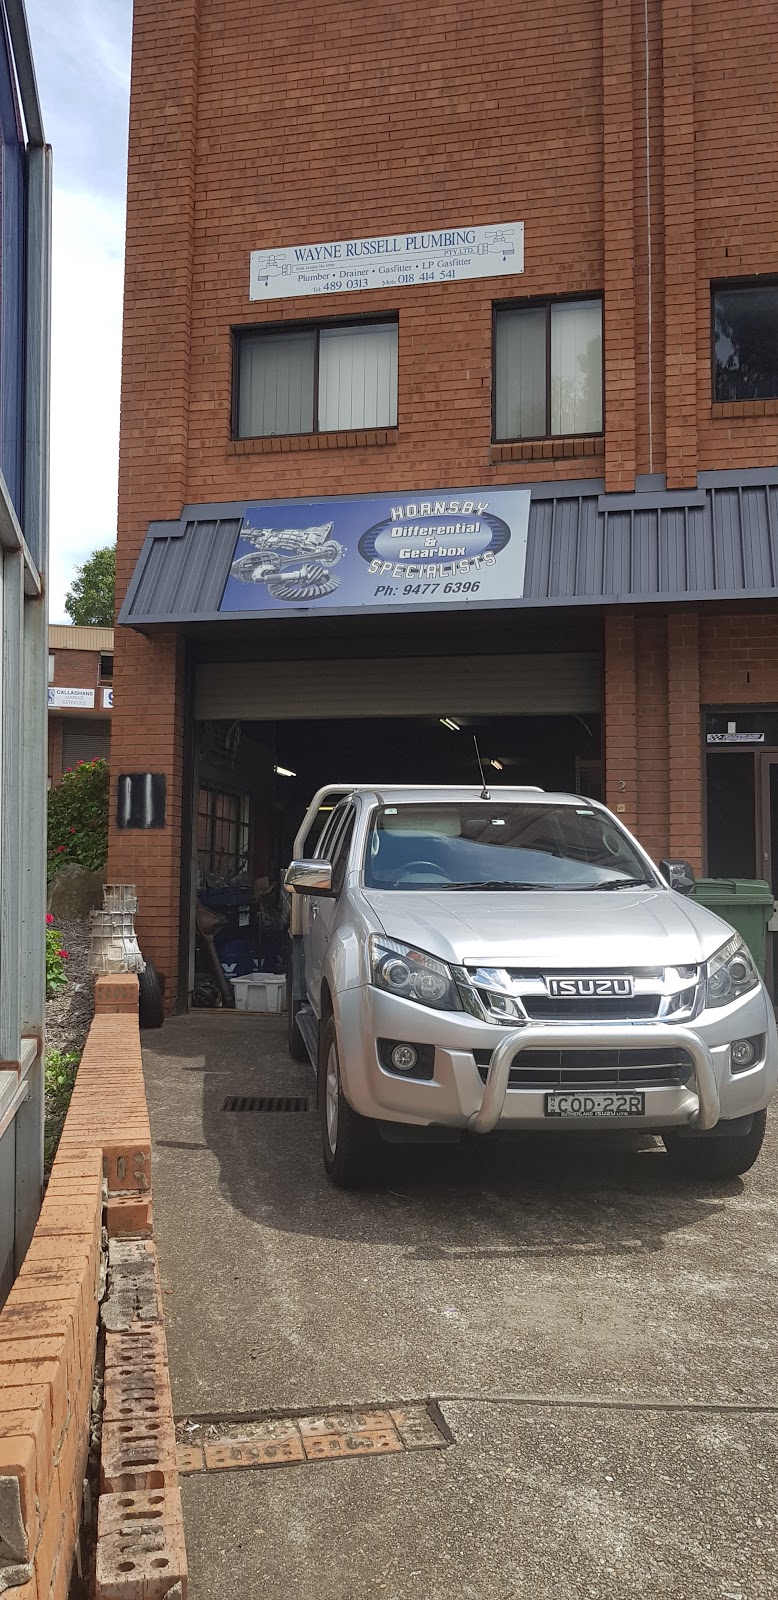 Hornsby Differential & Gearbox Specialists | car repair | 2/11 Leighton Pl, Hornsby NSW 2077, Australia | 0294776396 OR +61 2 9477 6396